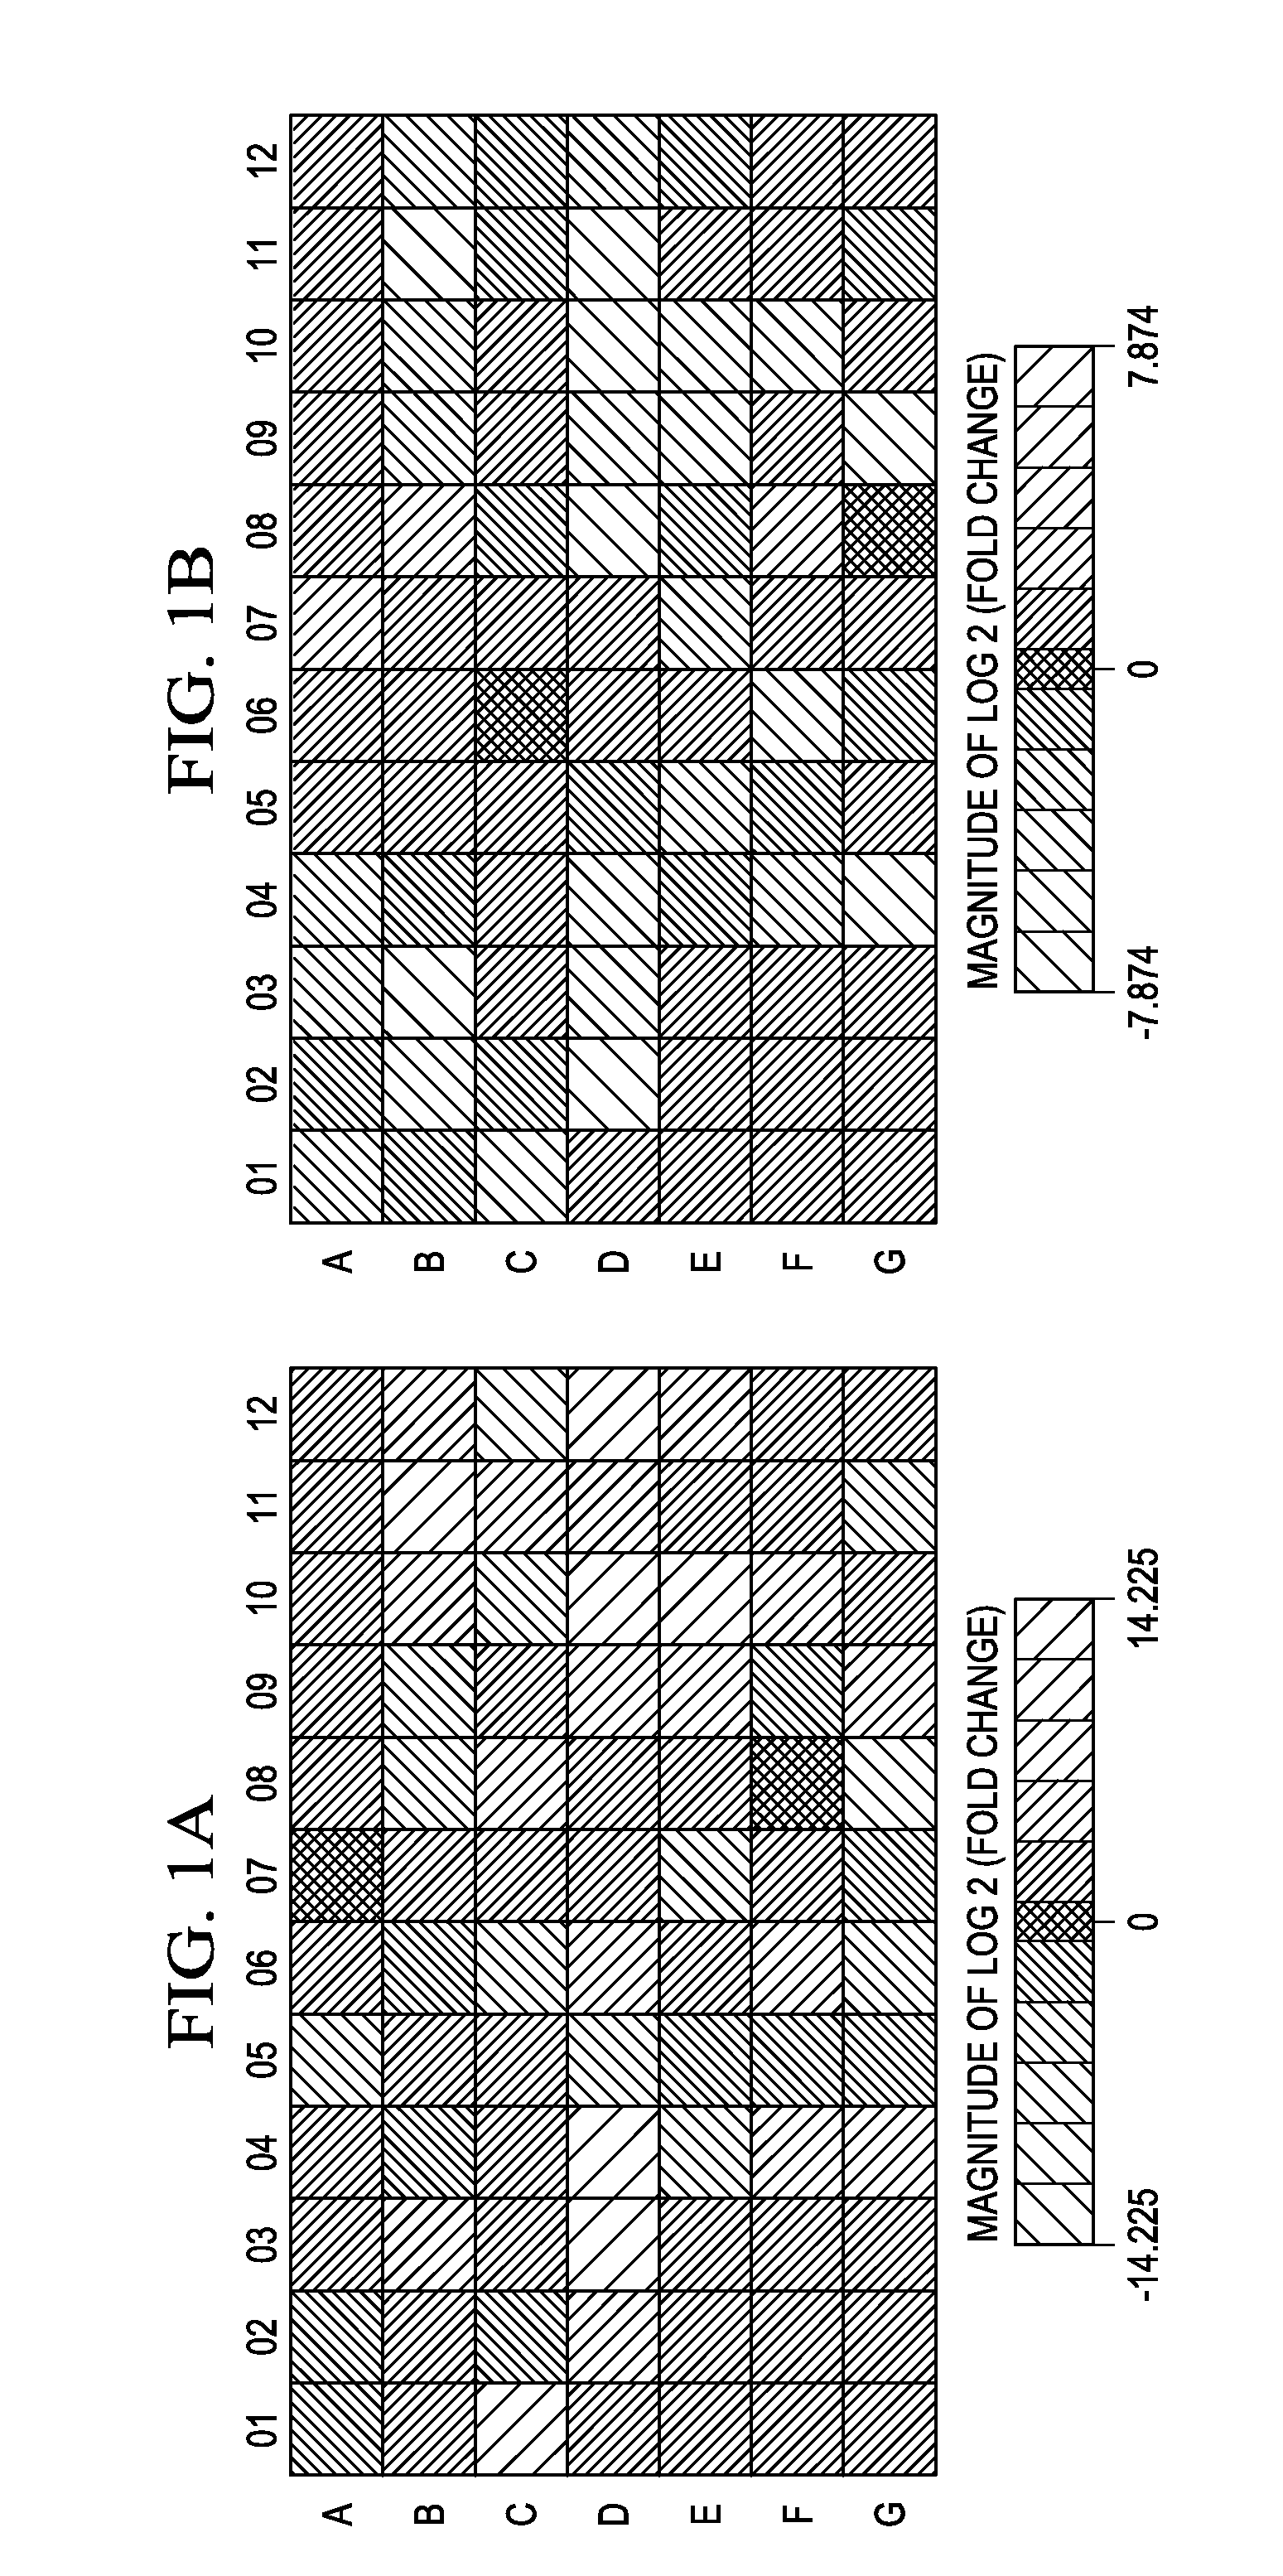 Method of achieving normoglycemia in diabetics by administration of Withaferin A